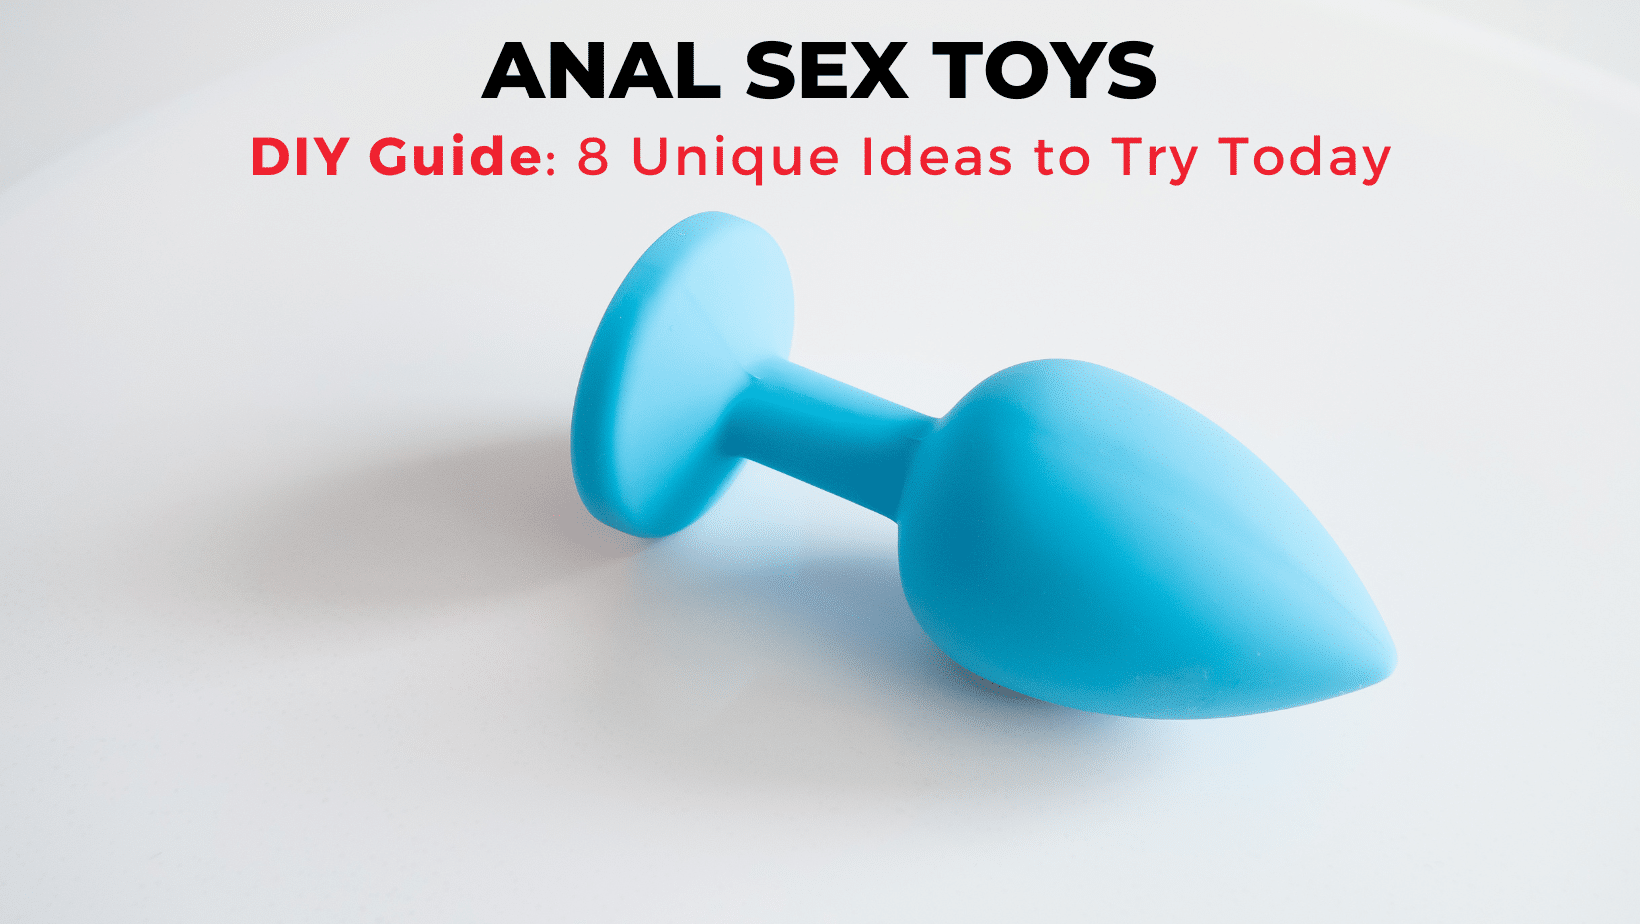 ali nojavan recommends anal toys home pic